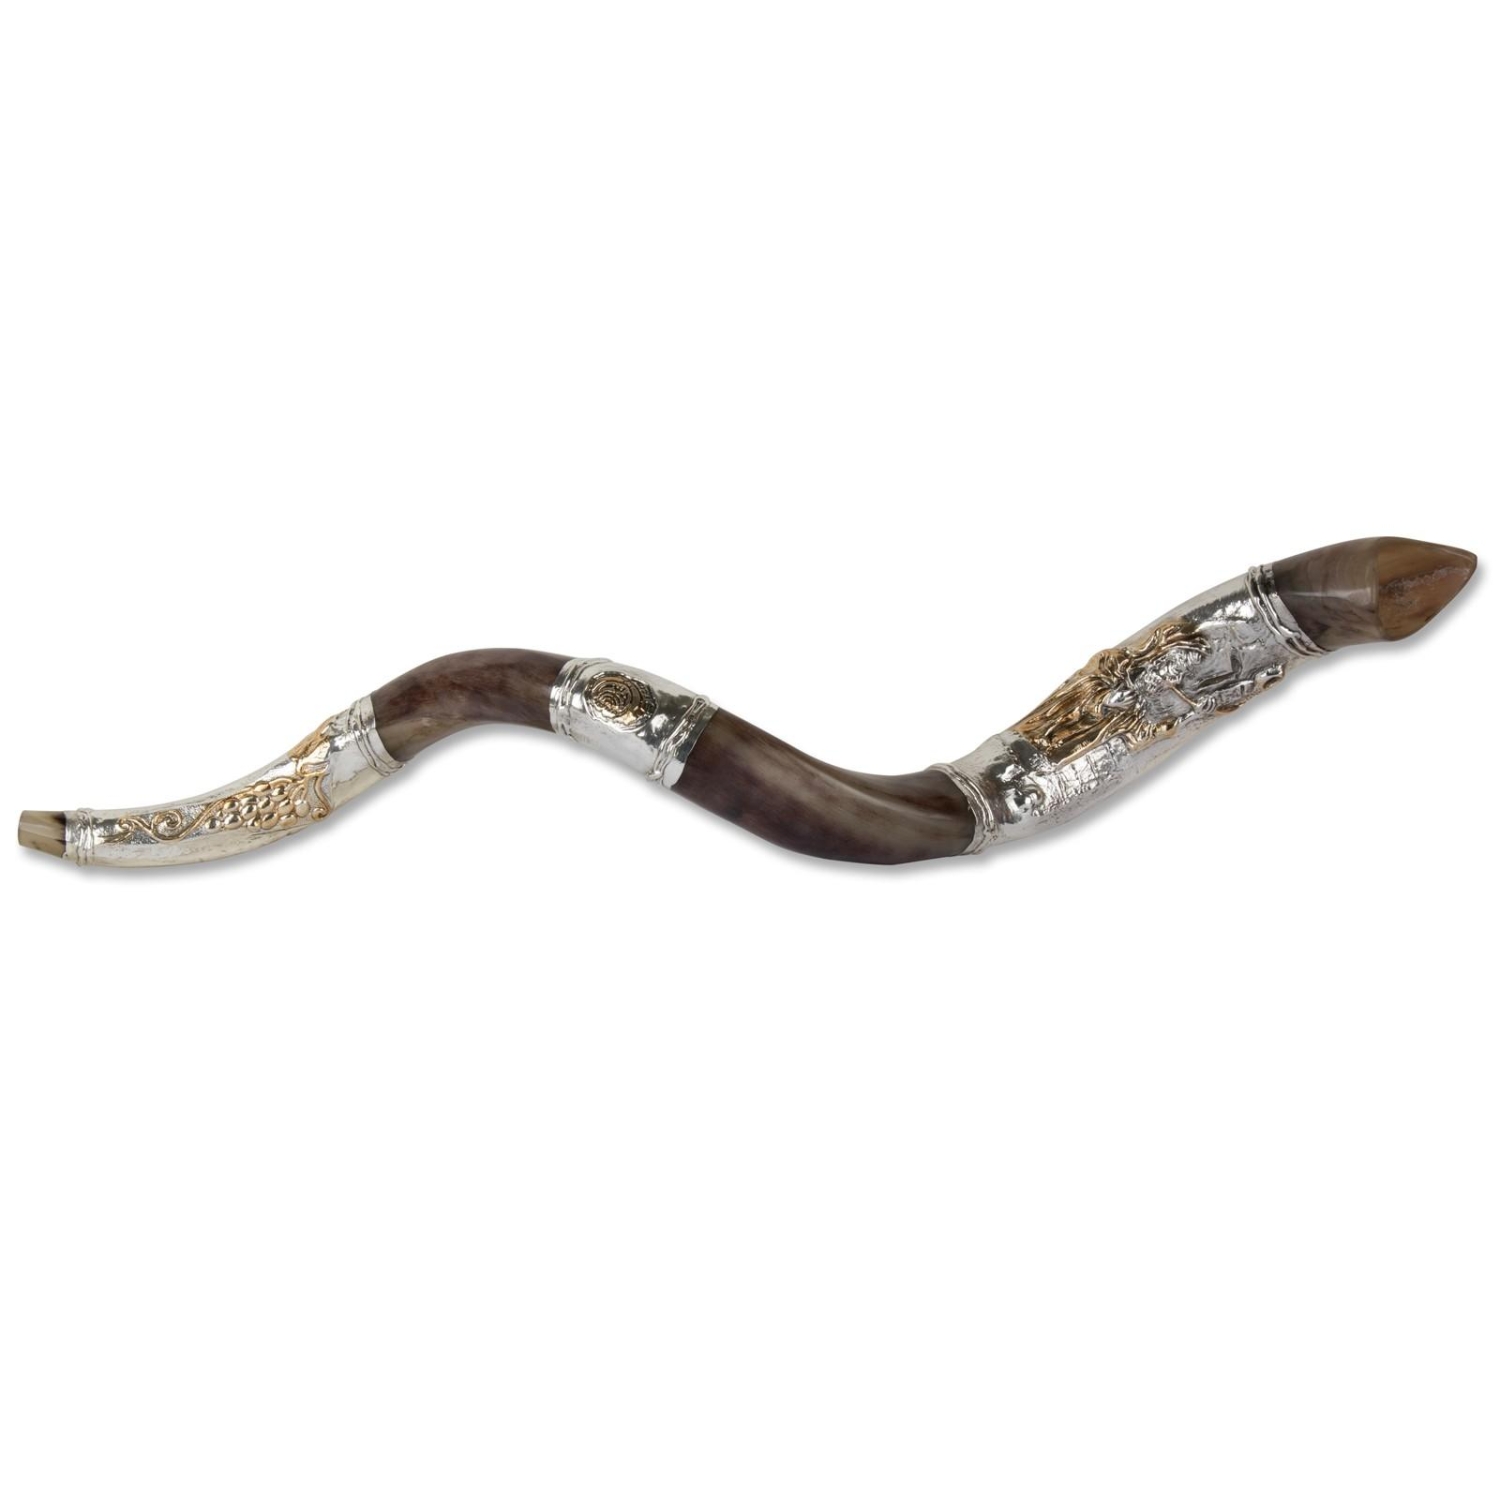 925 Sterling Silver Plated Yemenite Kudu Ram's Horn - Chassid Design (Choice of Sizes) - 1